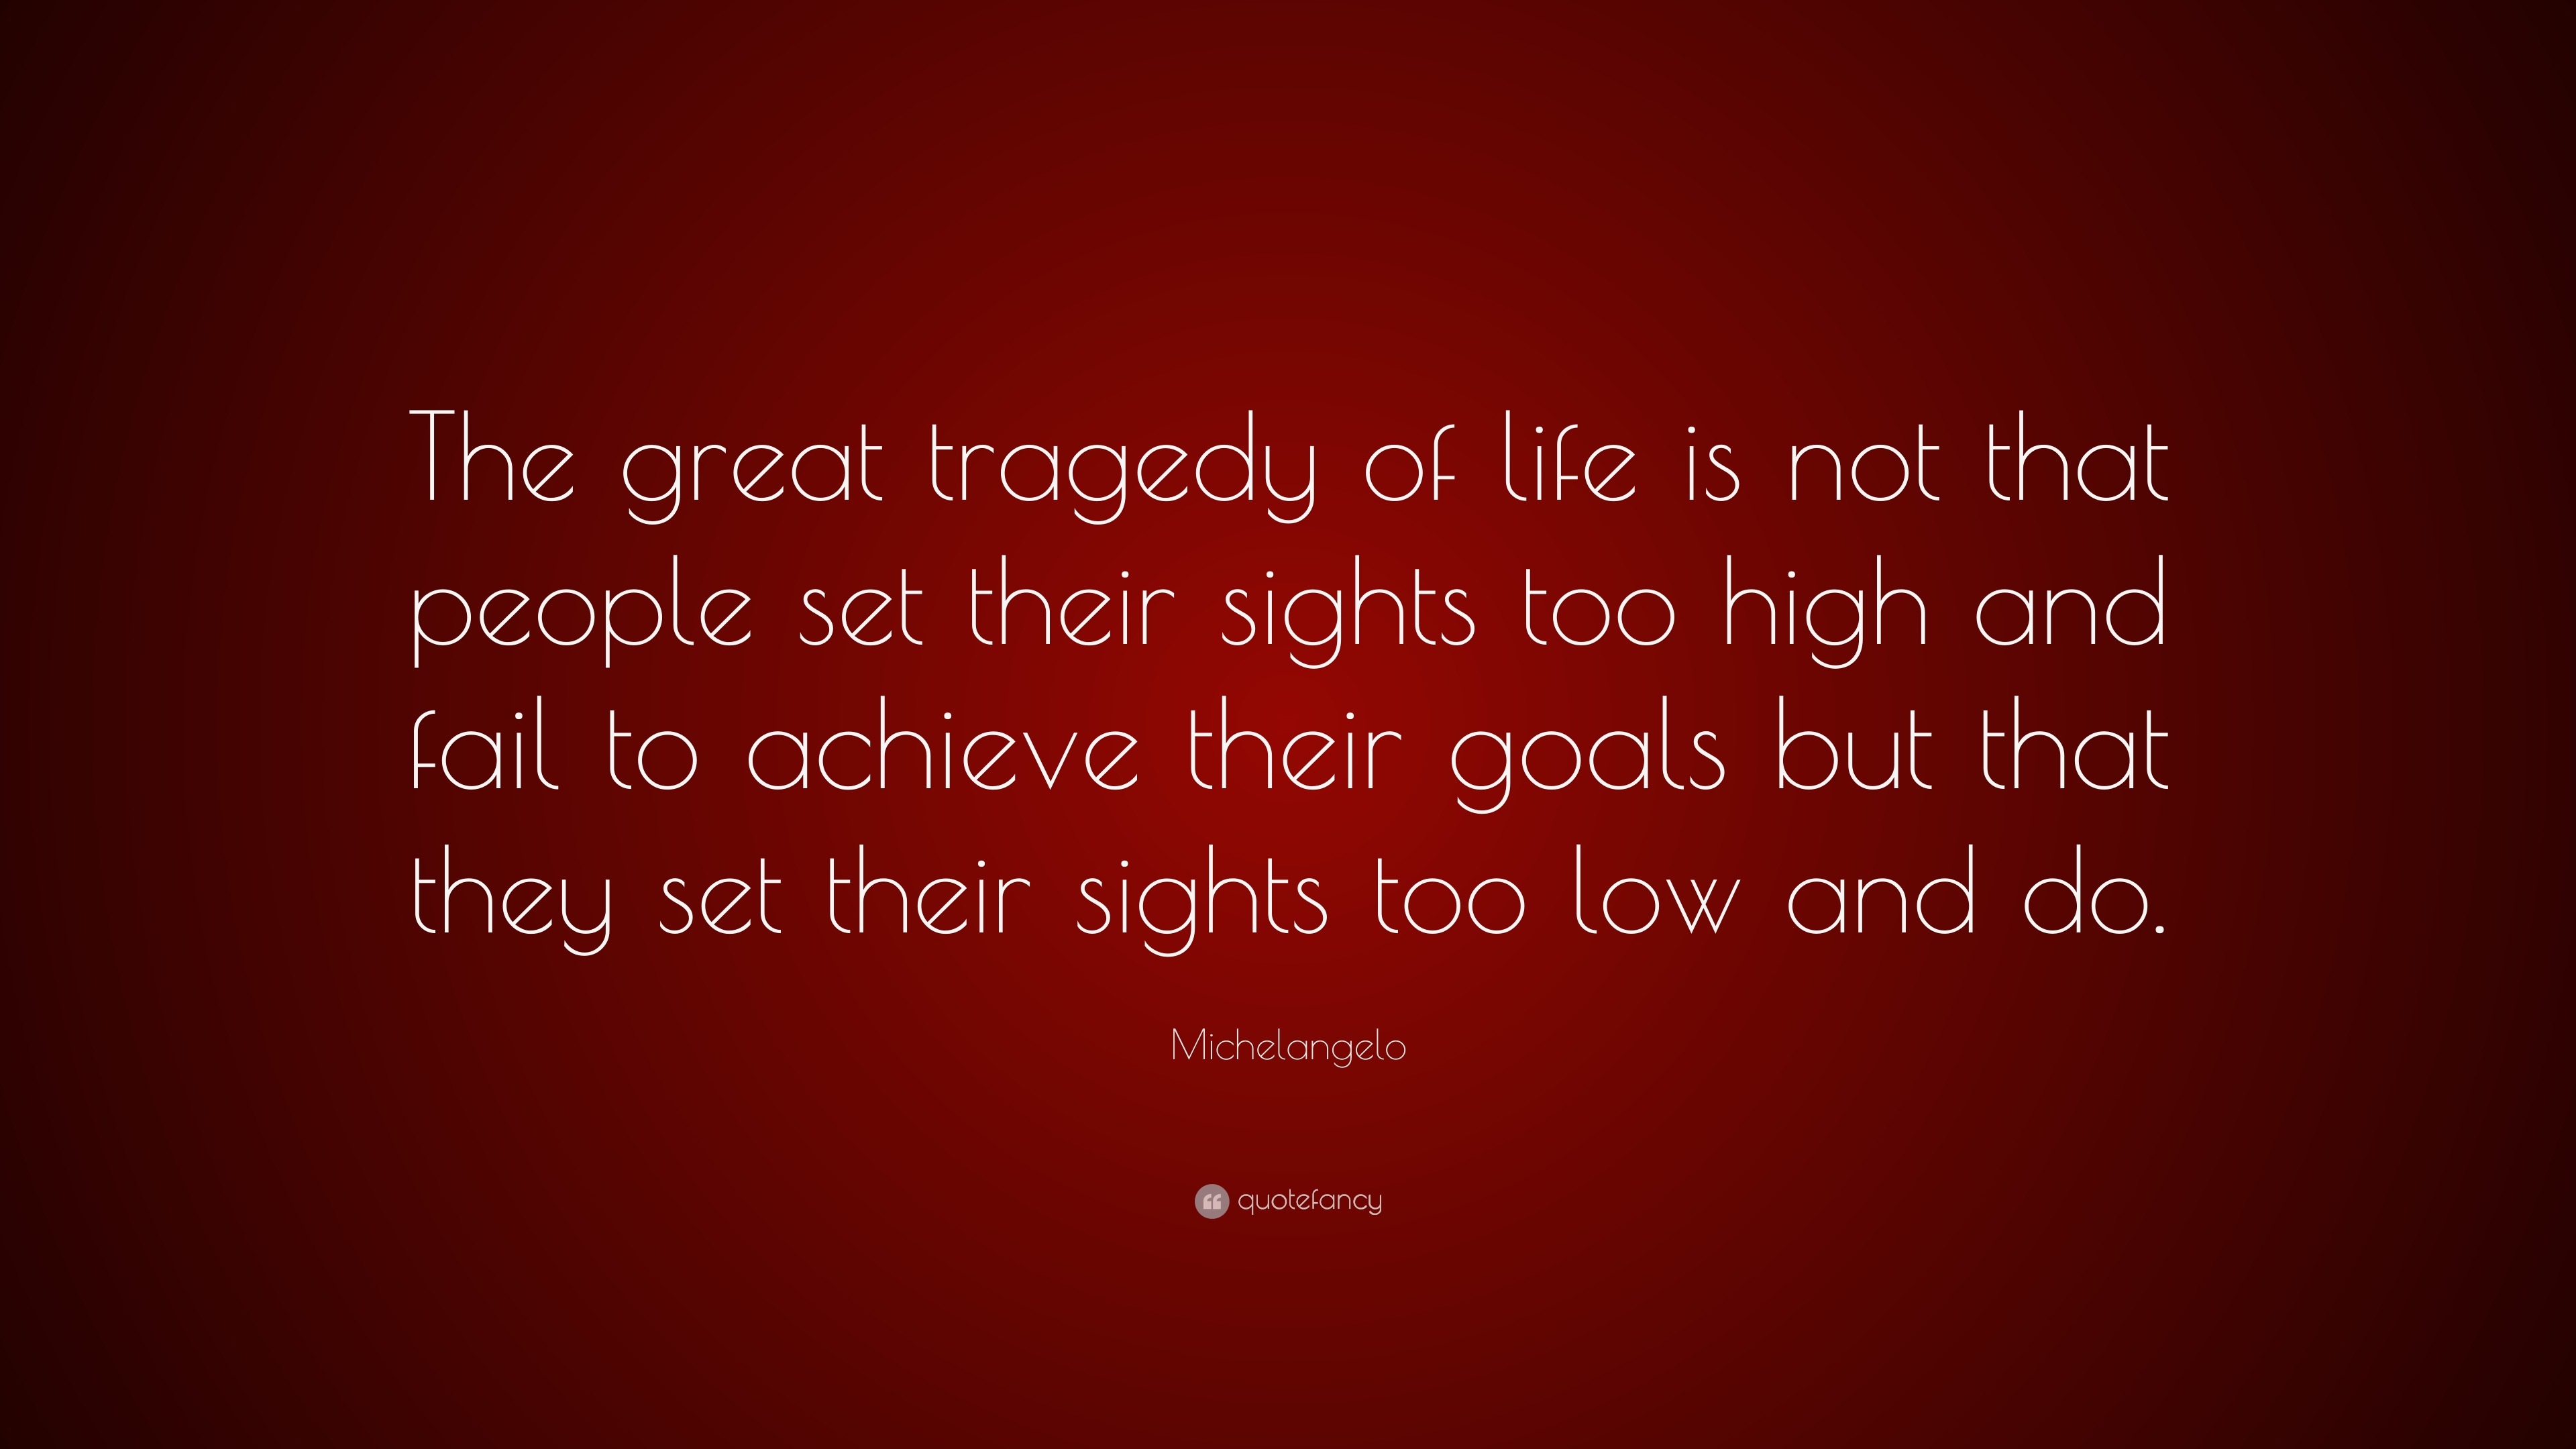 Michelangelo Quote “The great tragedy of life is not that people set their sights